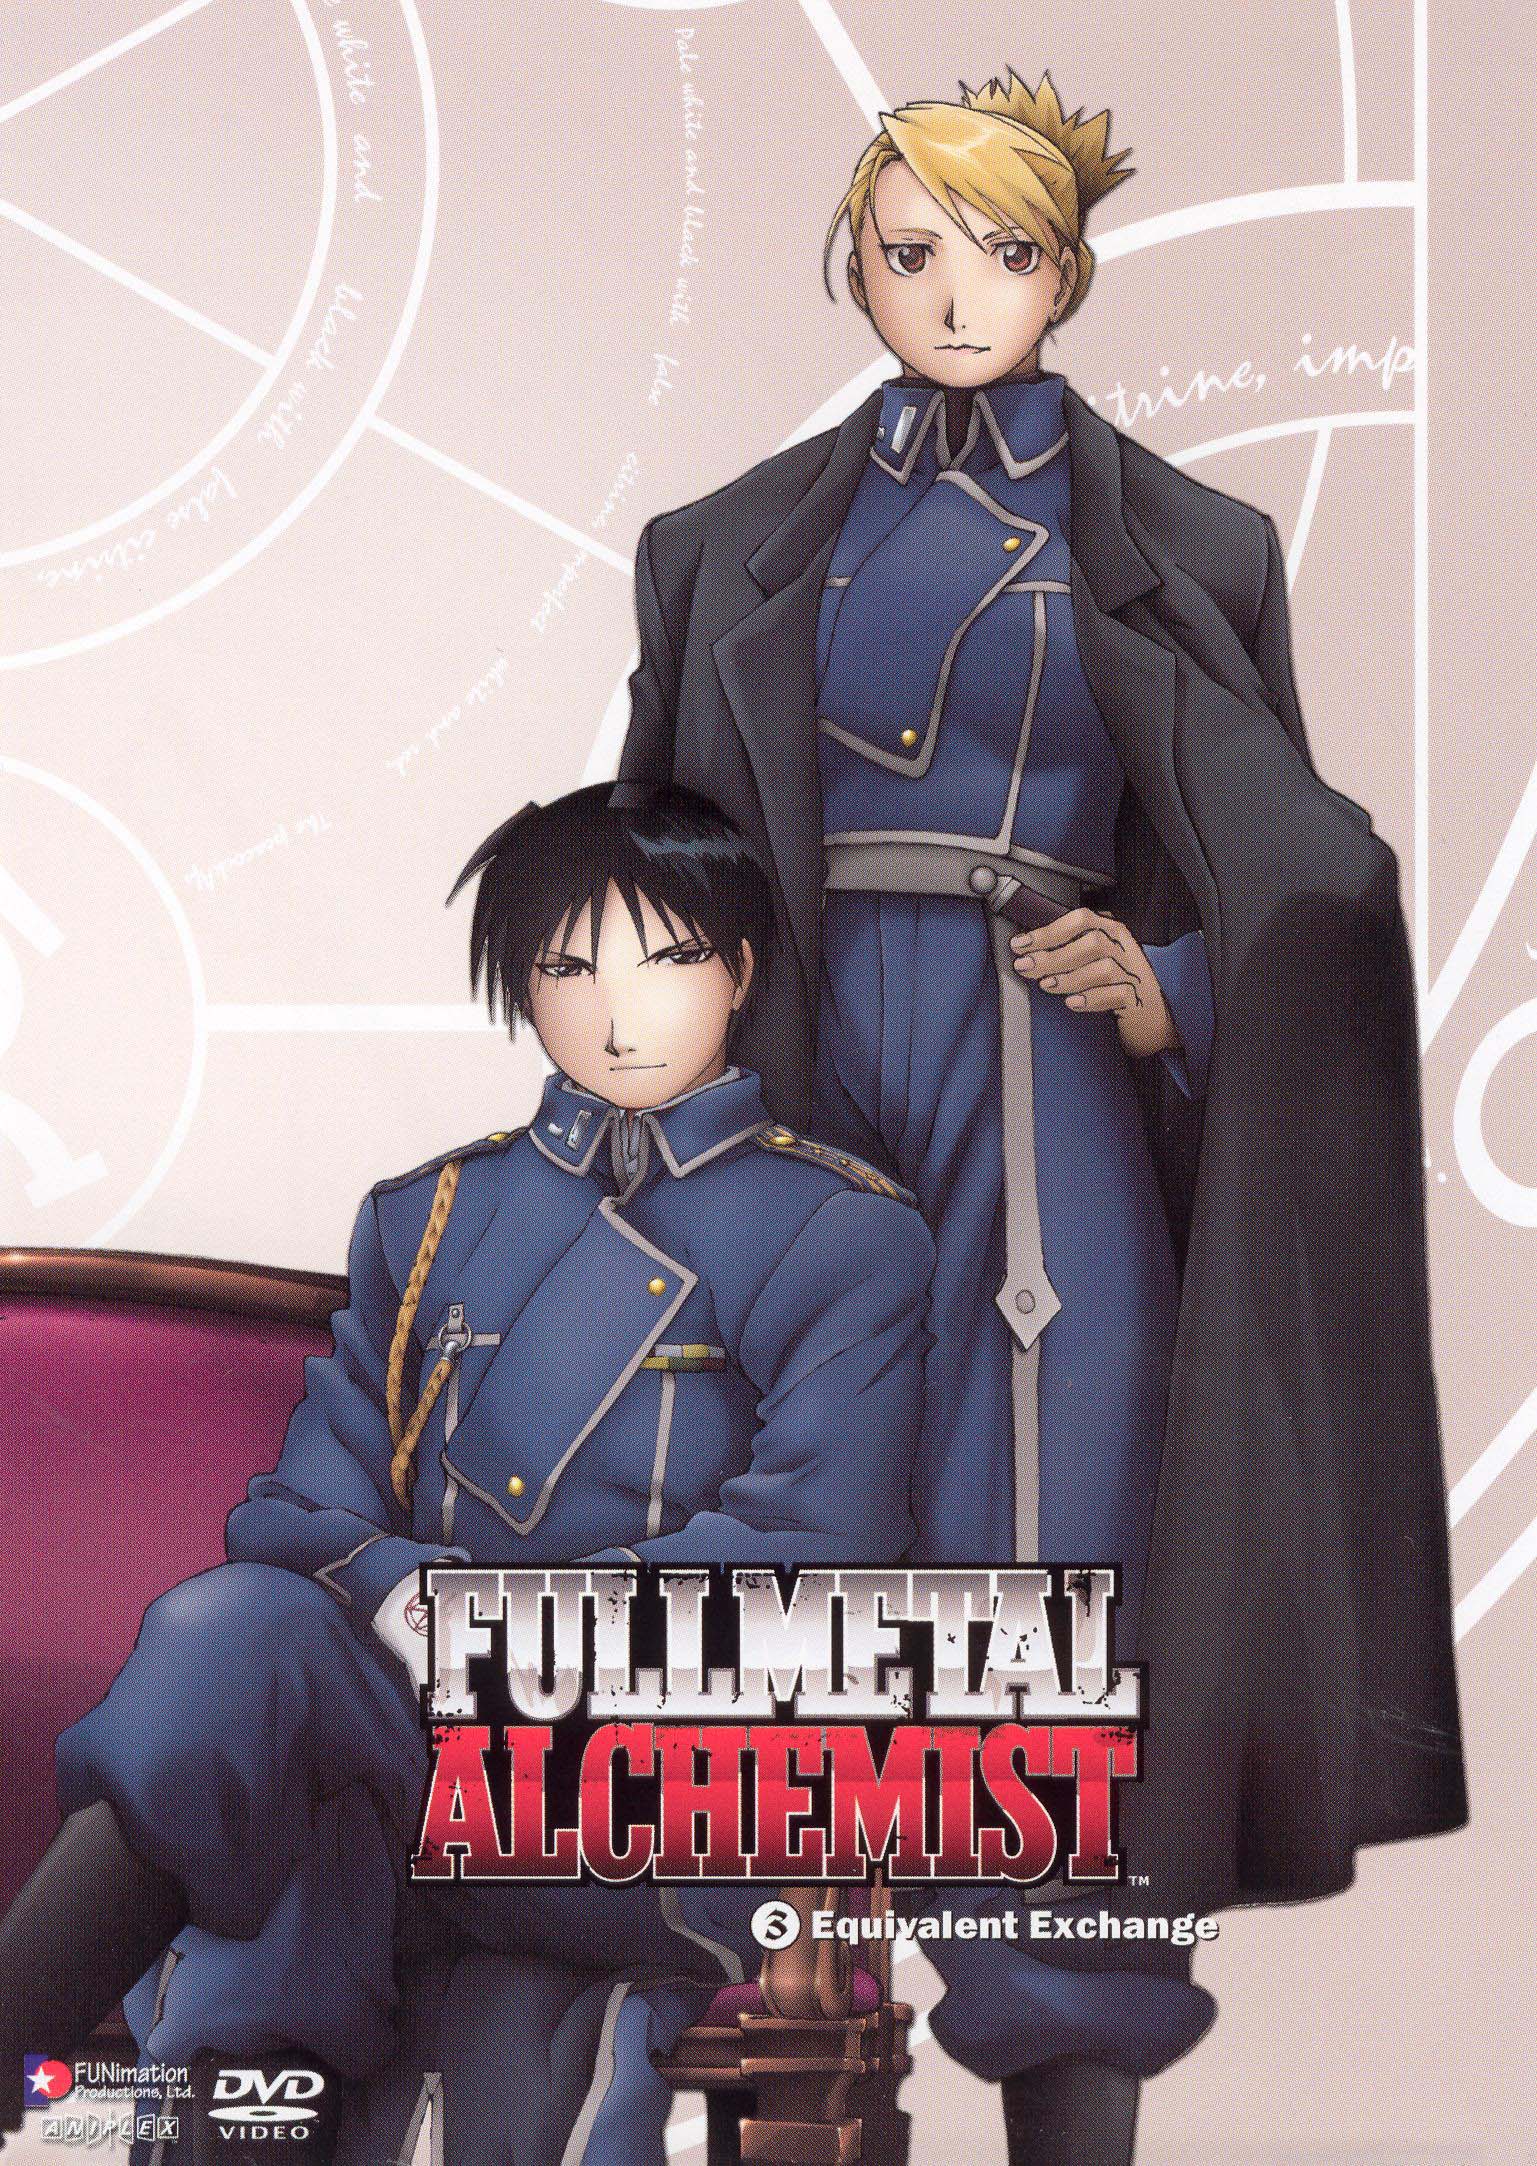 Fullmetal Alchemist Discussion: Is Equivalent Exchange Real?